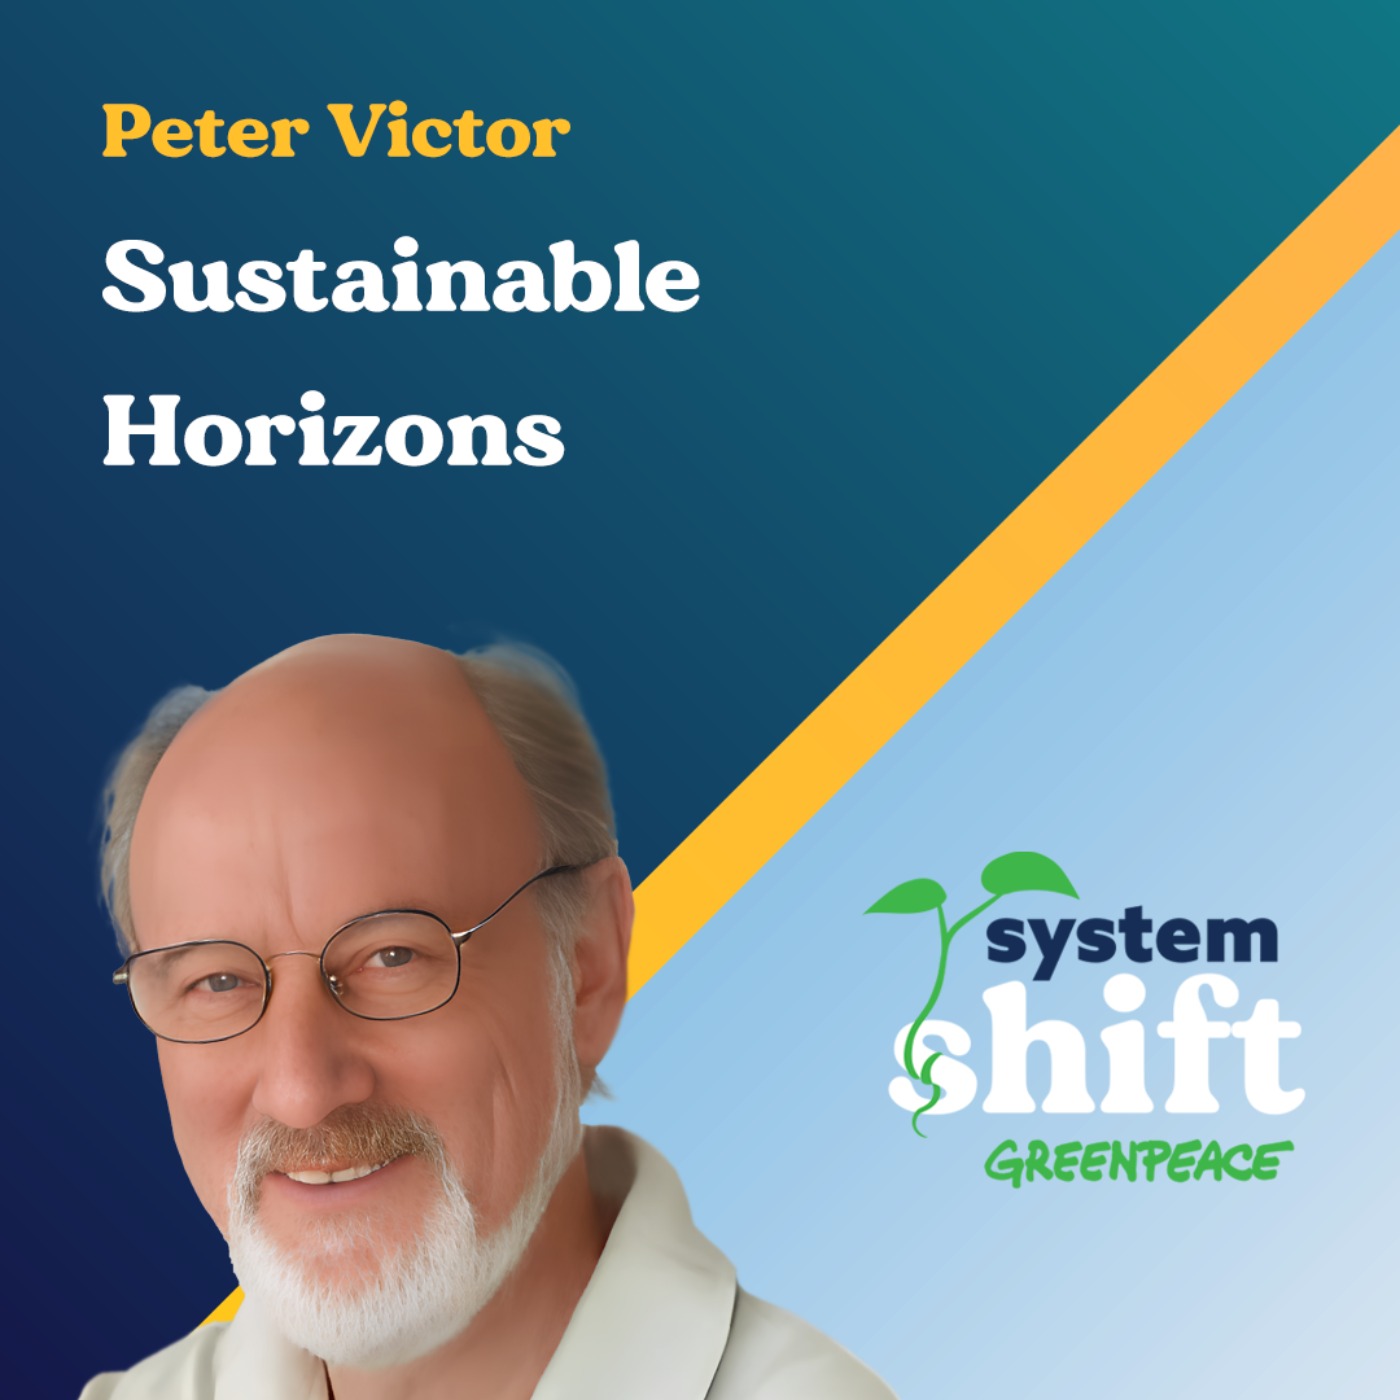 Peter Victor: Sustainable Horizons